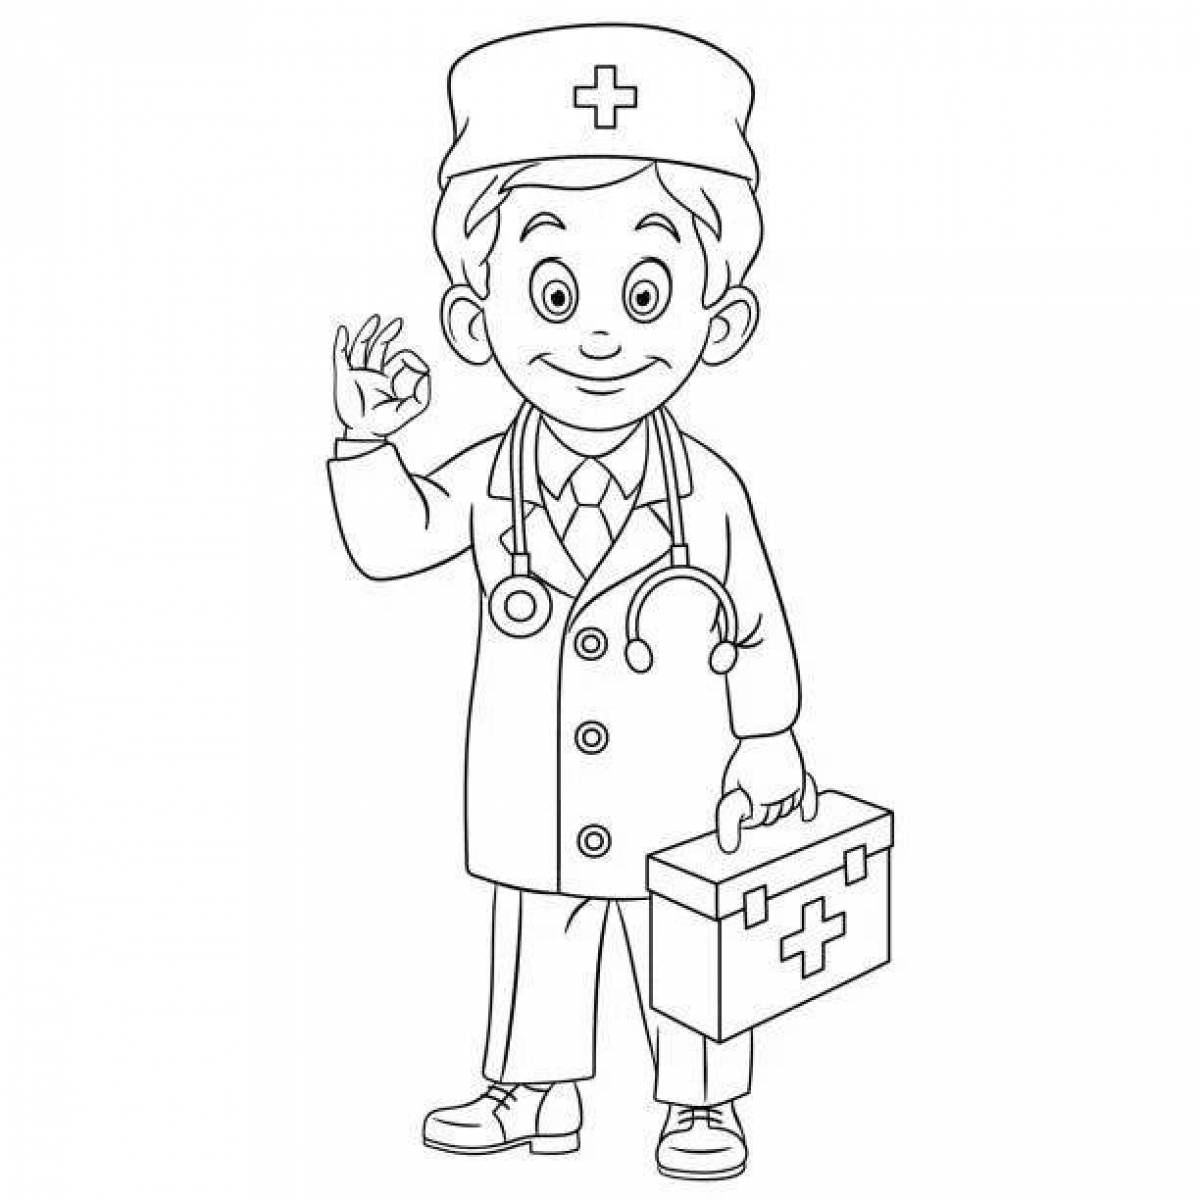 Colorful doctor coloring page